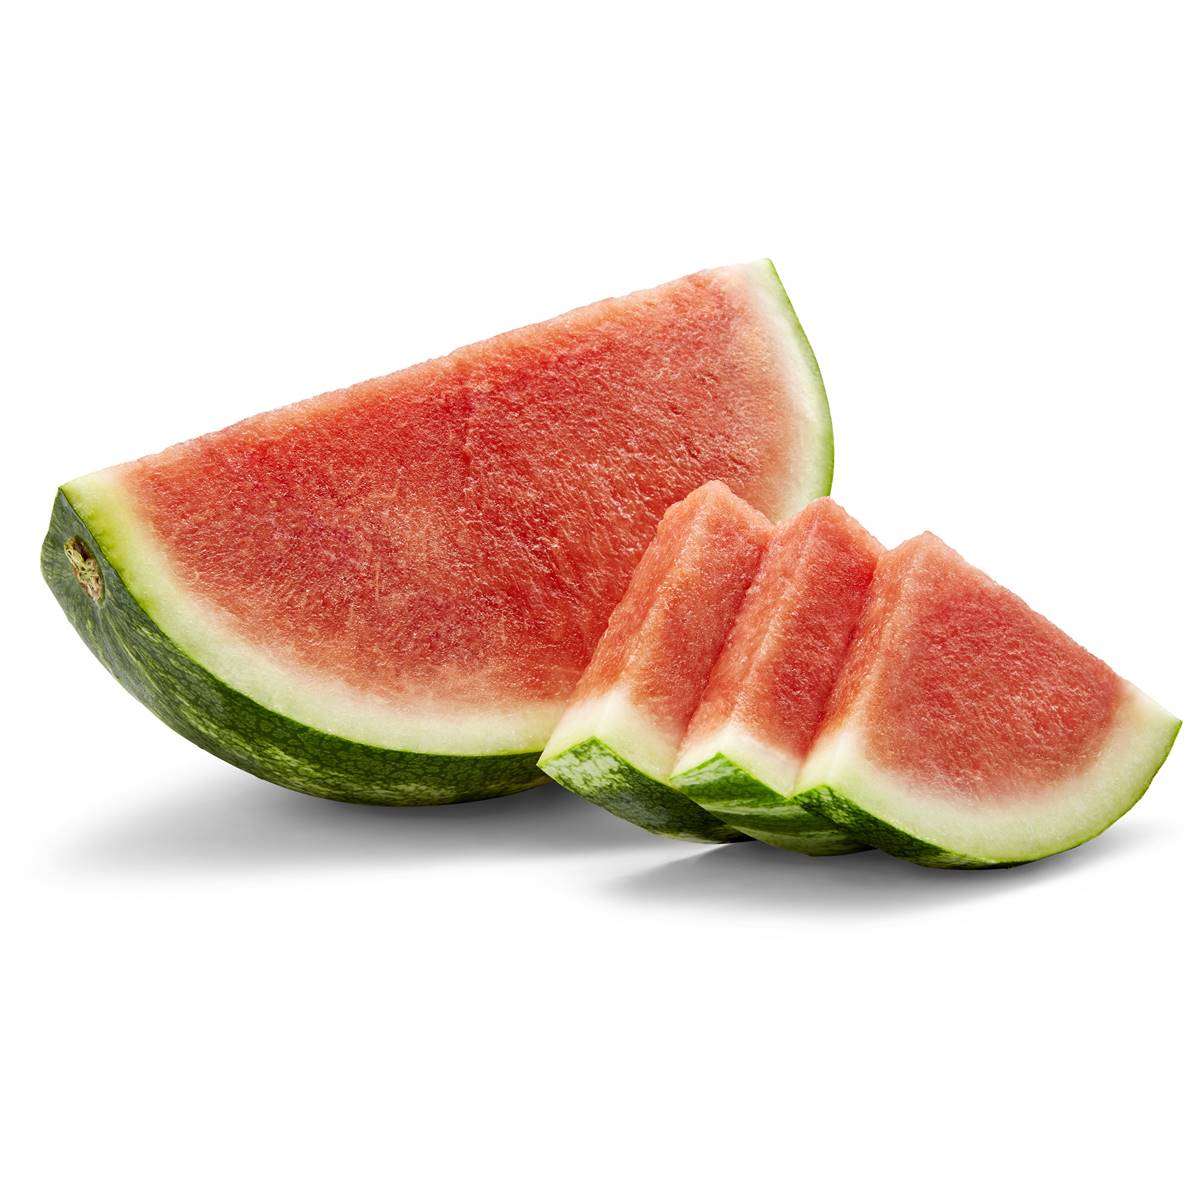 Calories in Woolworths Red Watermelon Cut Quarter